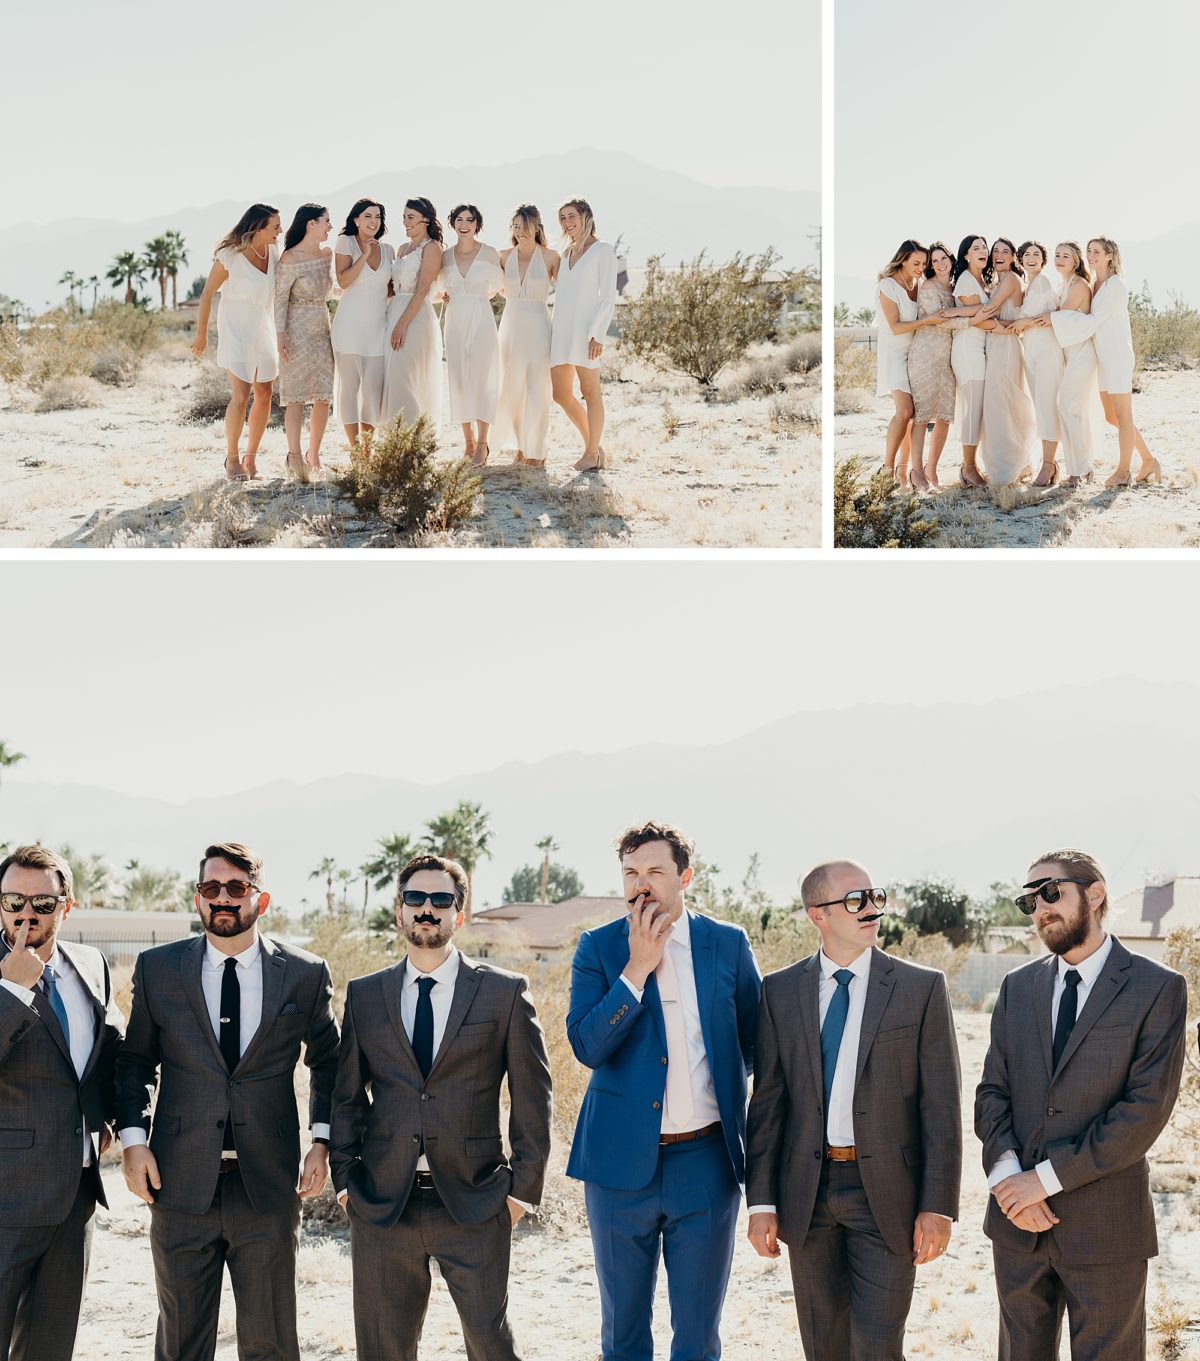 Bridal party photography at this desert wedding in Southern California. Lautner Compound wedding captured by Briana Morrison